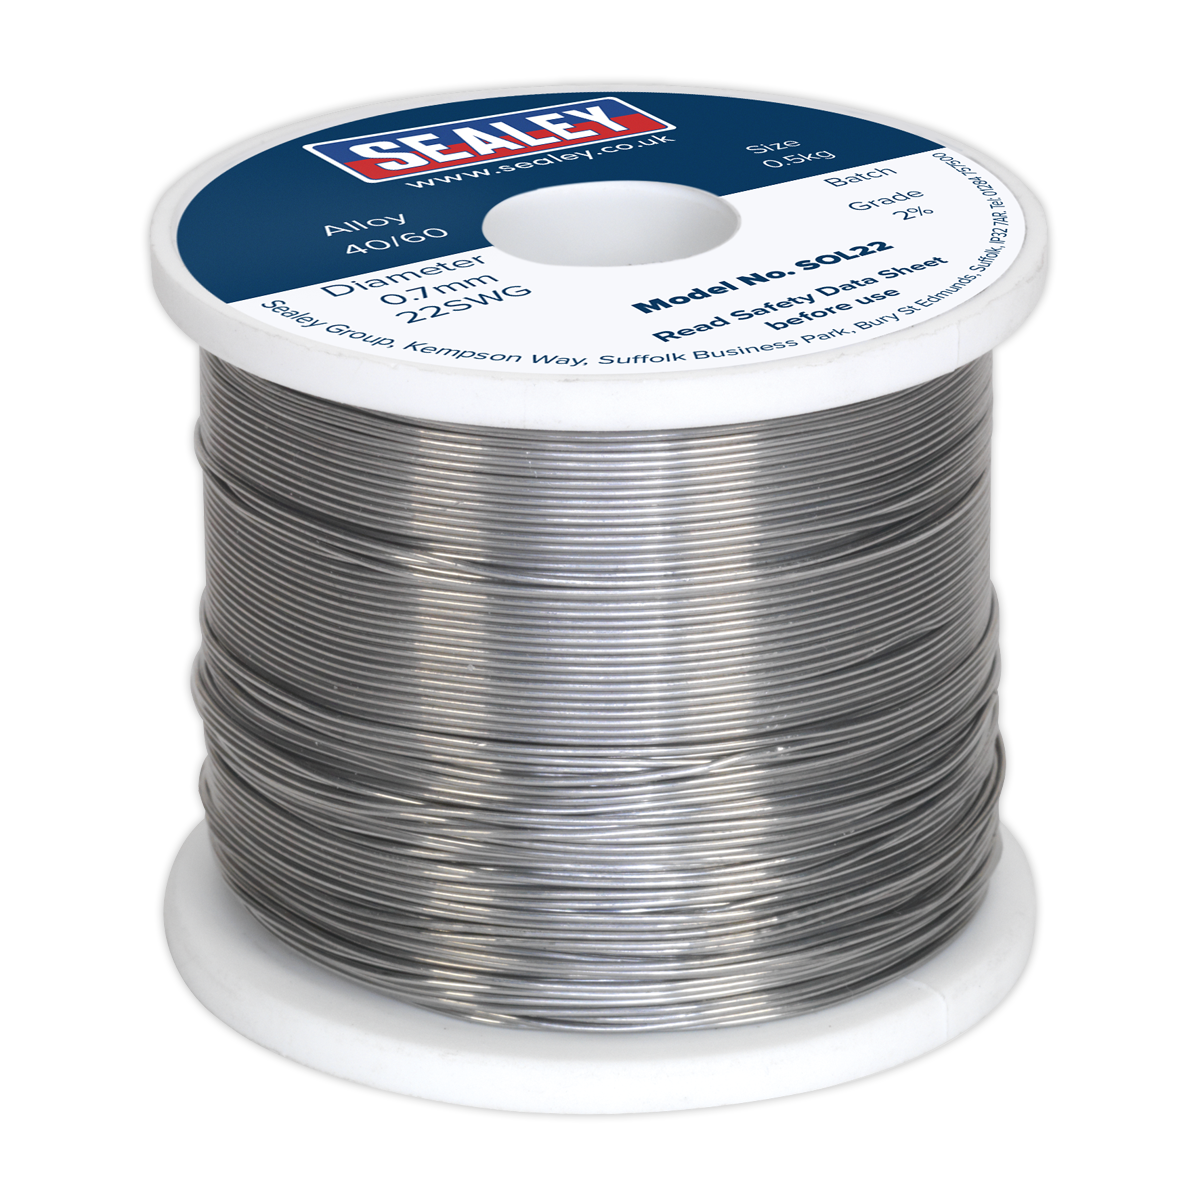 Sealey Quick flow resin cored solder